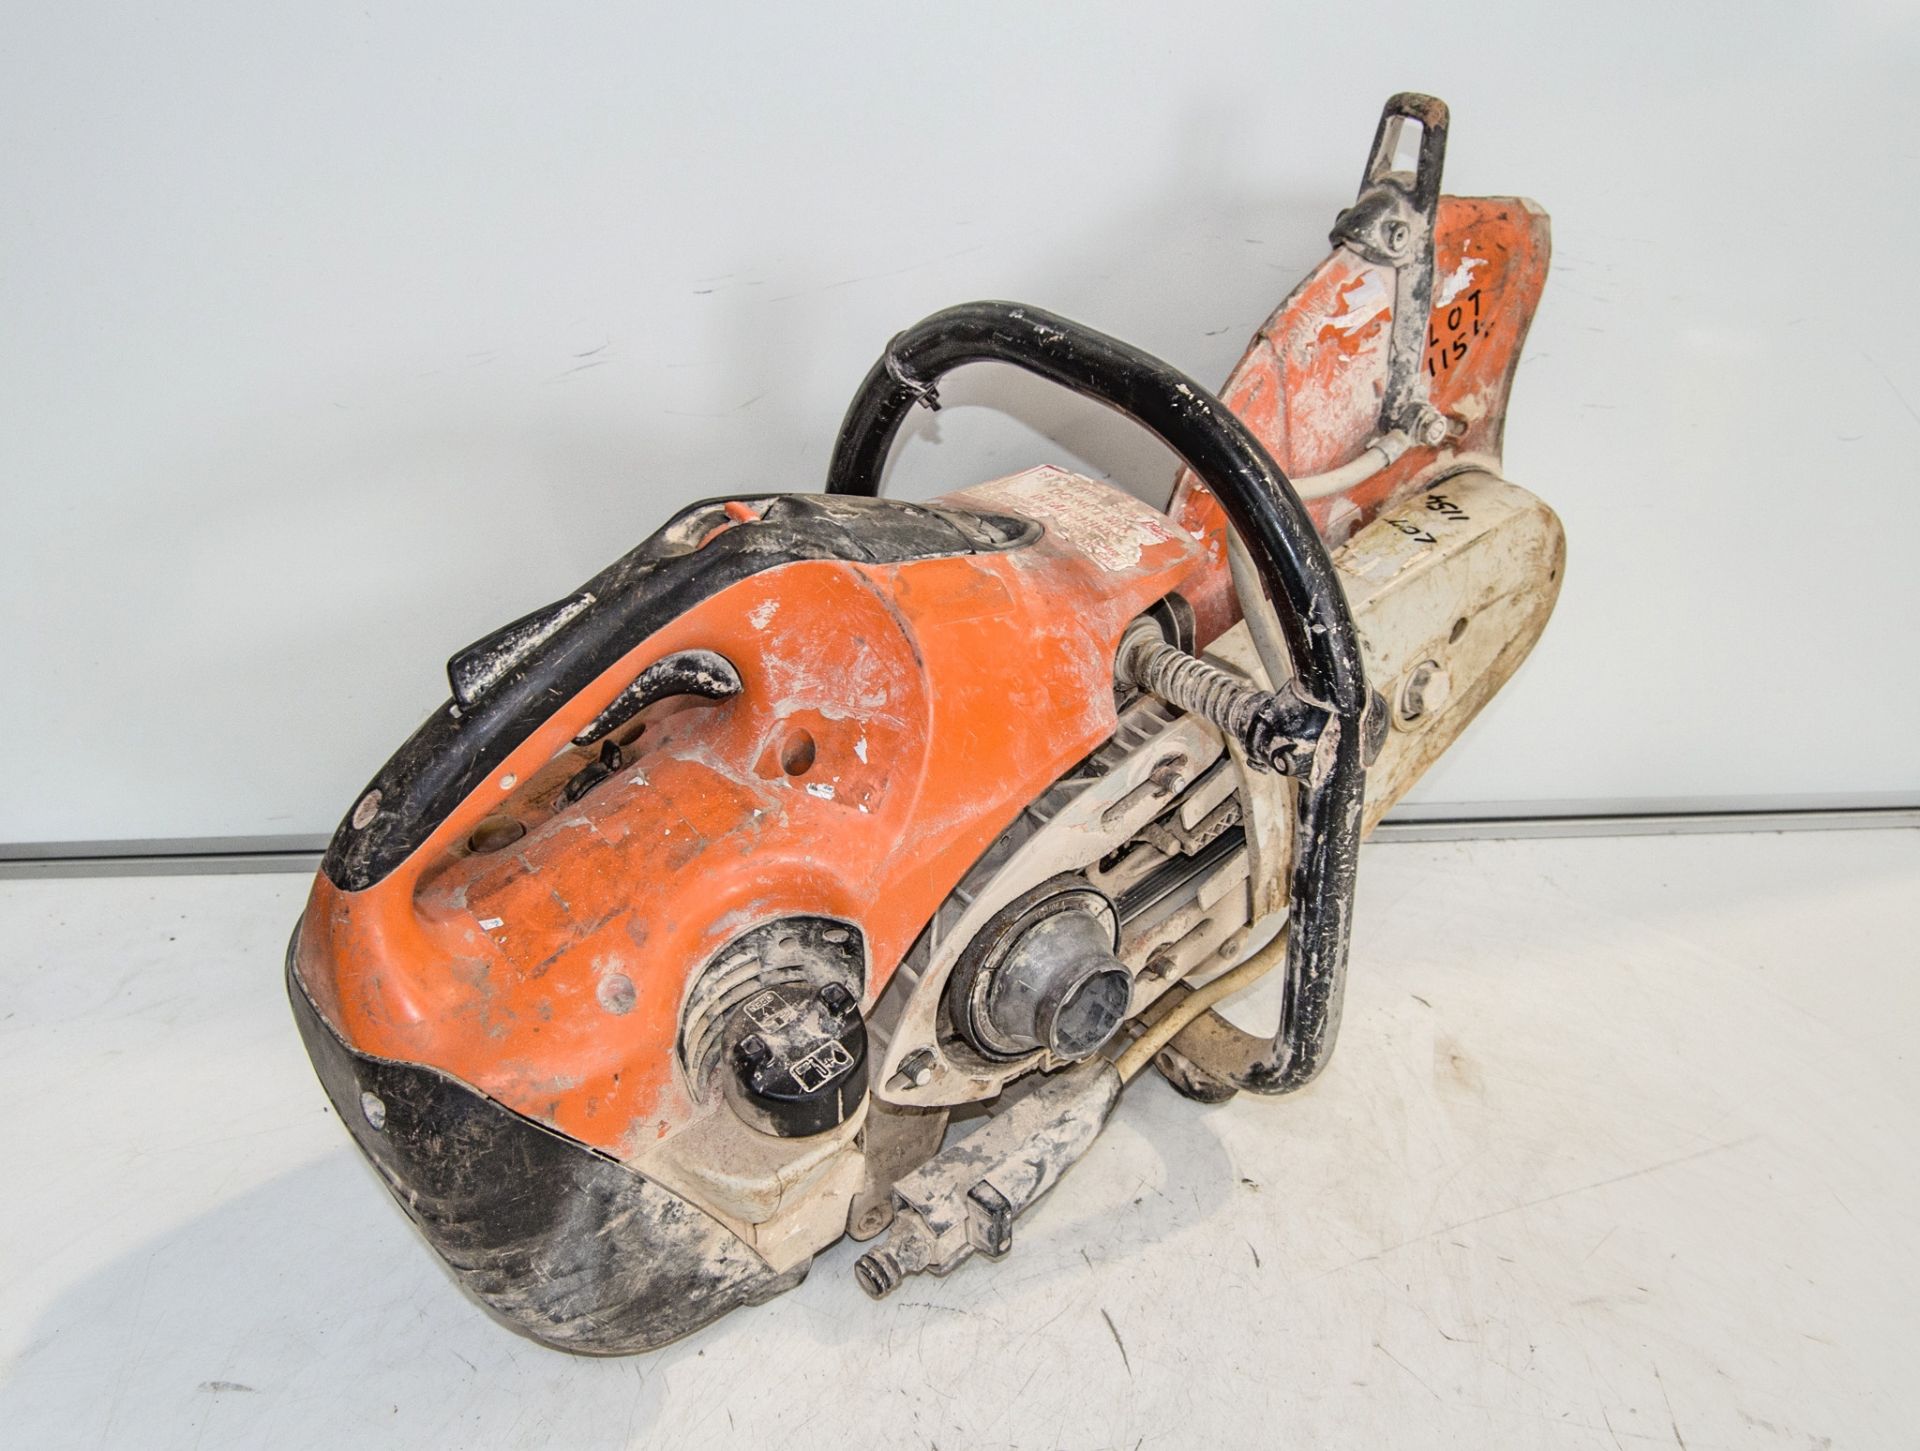 Stihl TS410 petrol driven cut off saw ** Pull cord assembly missing and parts loose ** - Bild 2 aus 2